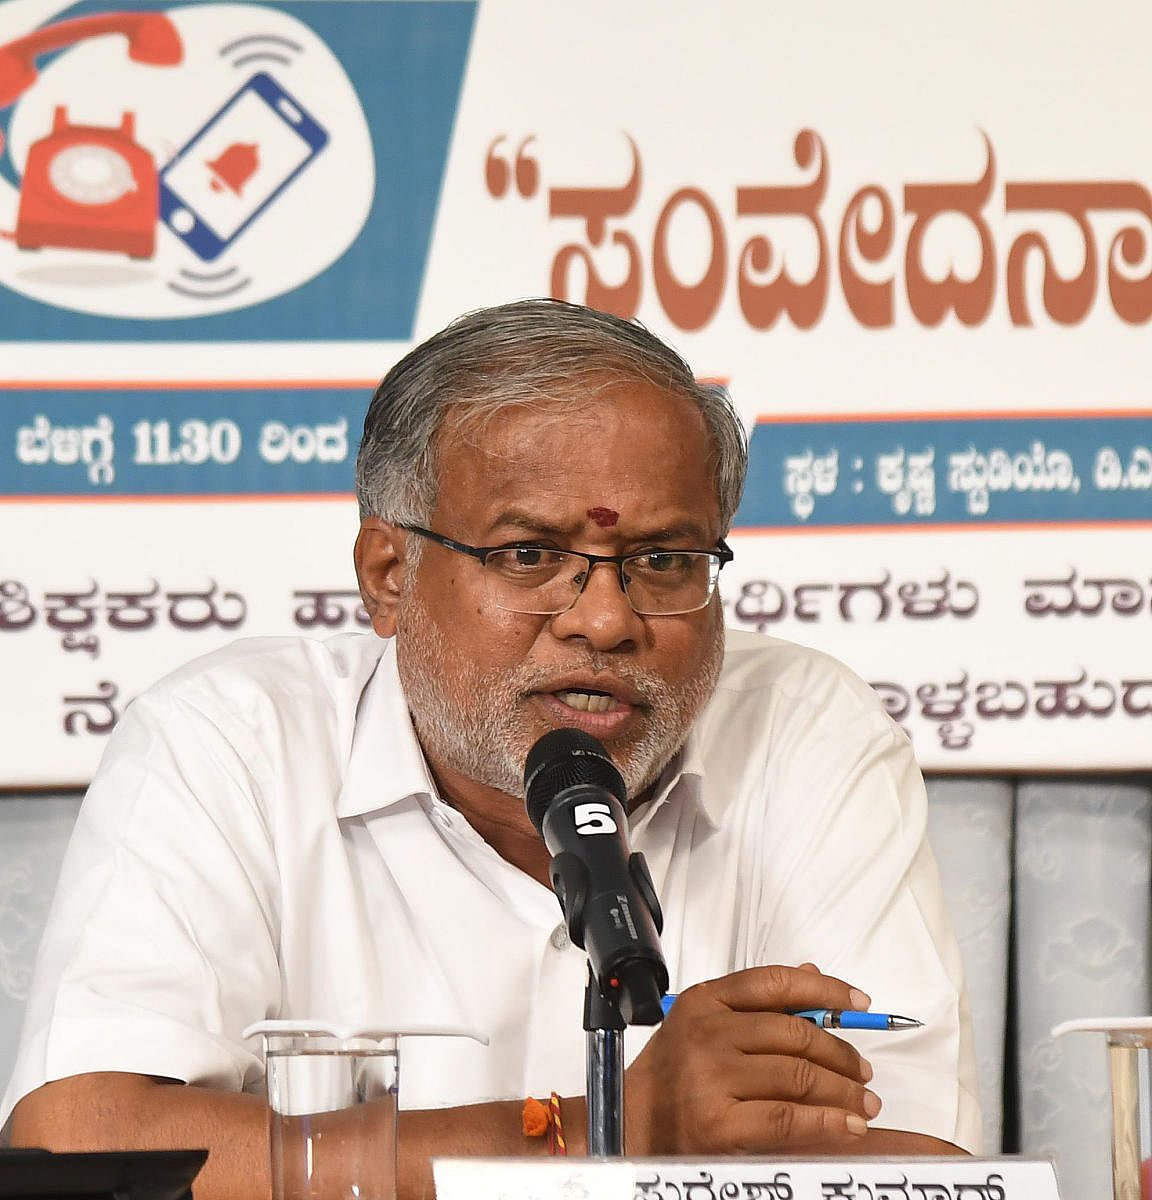 Primary and secondary education minister Suresh Kumar. (DH Photo)